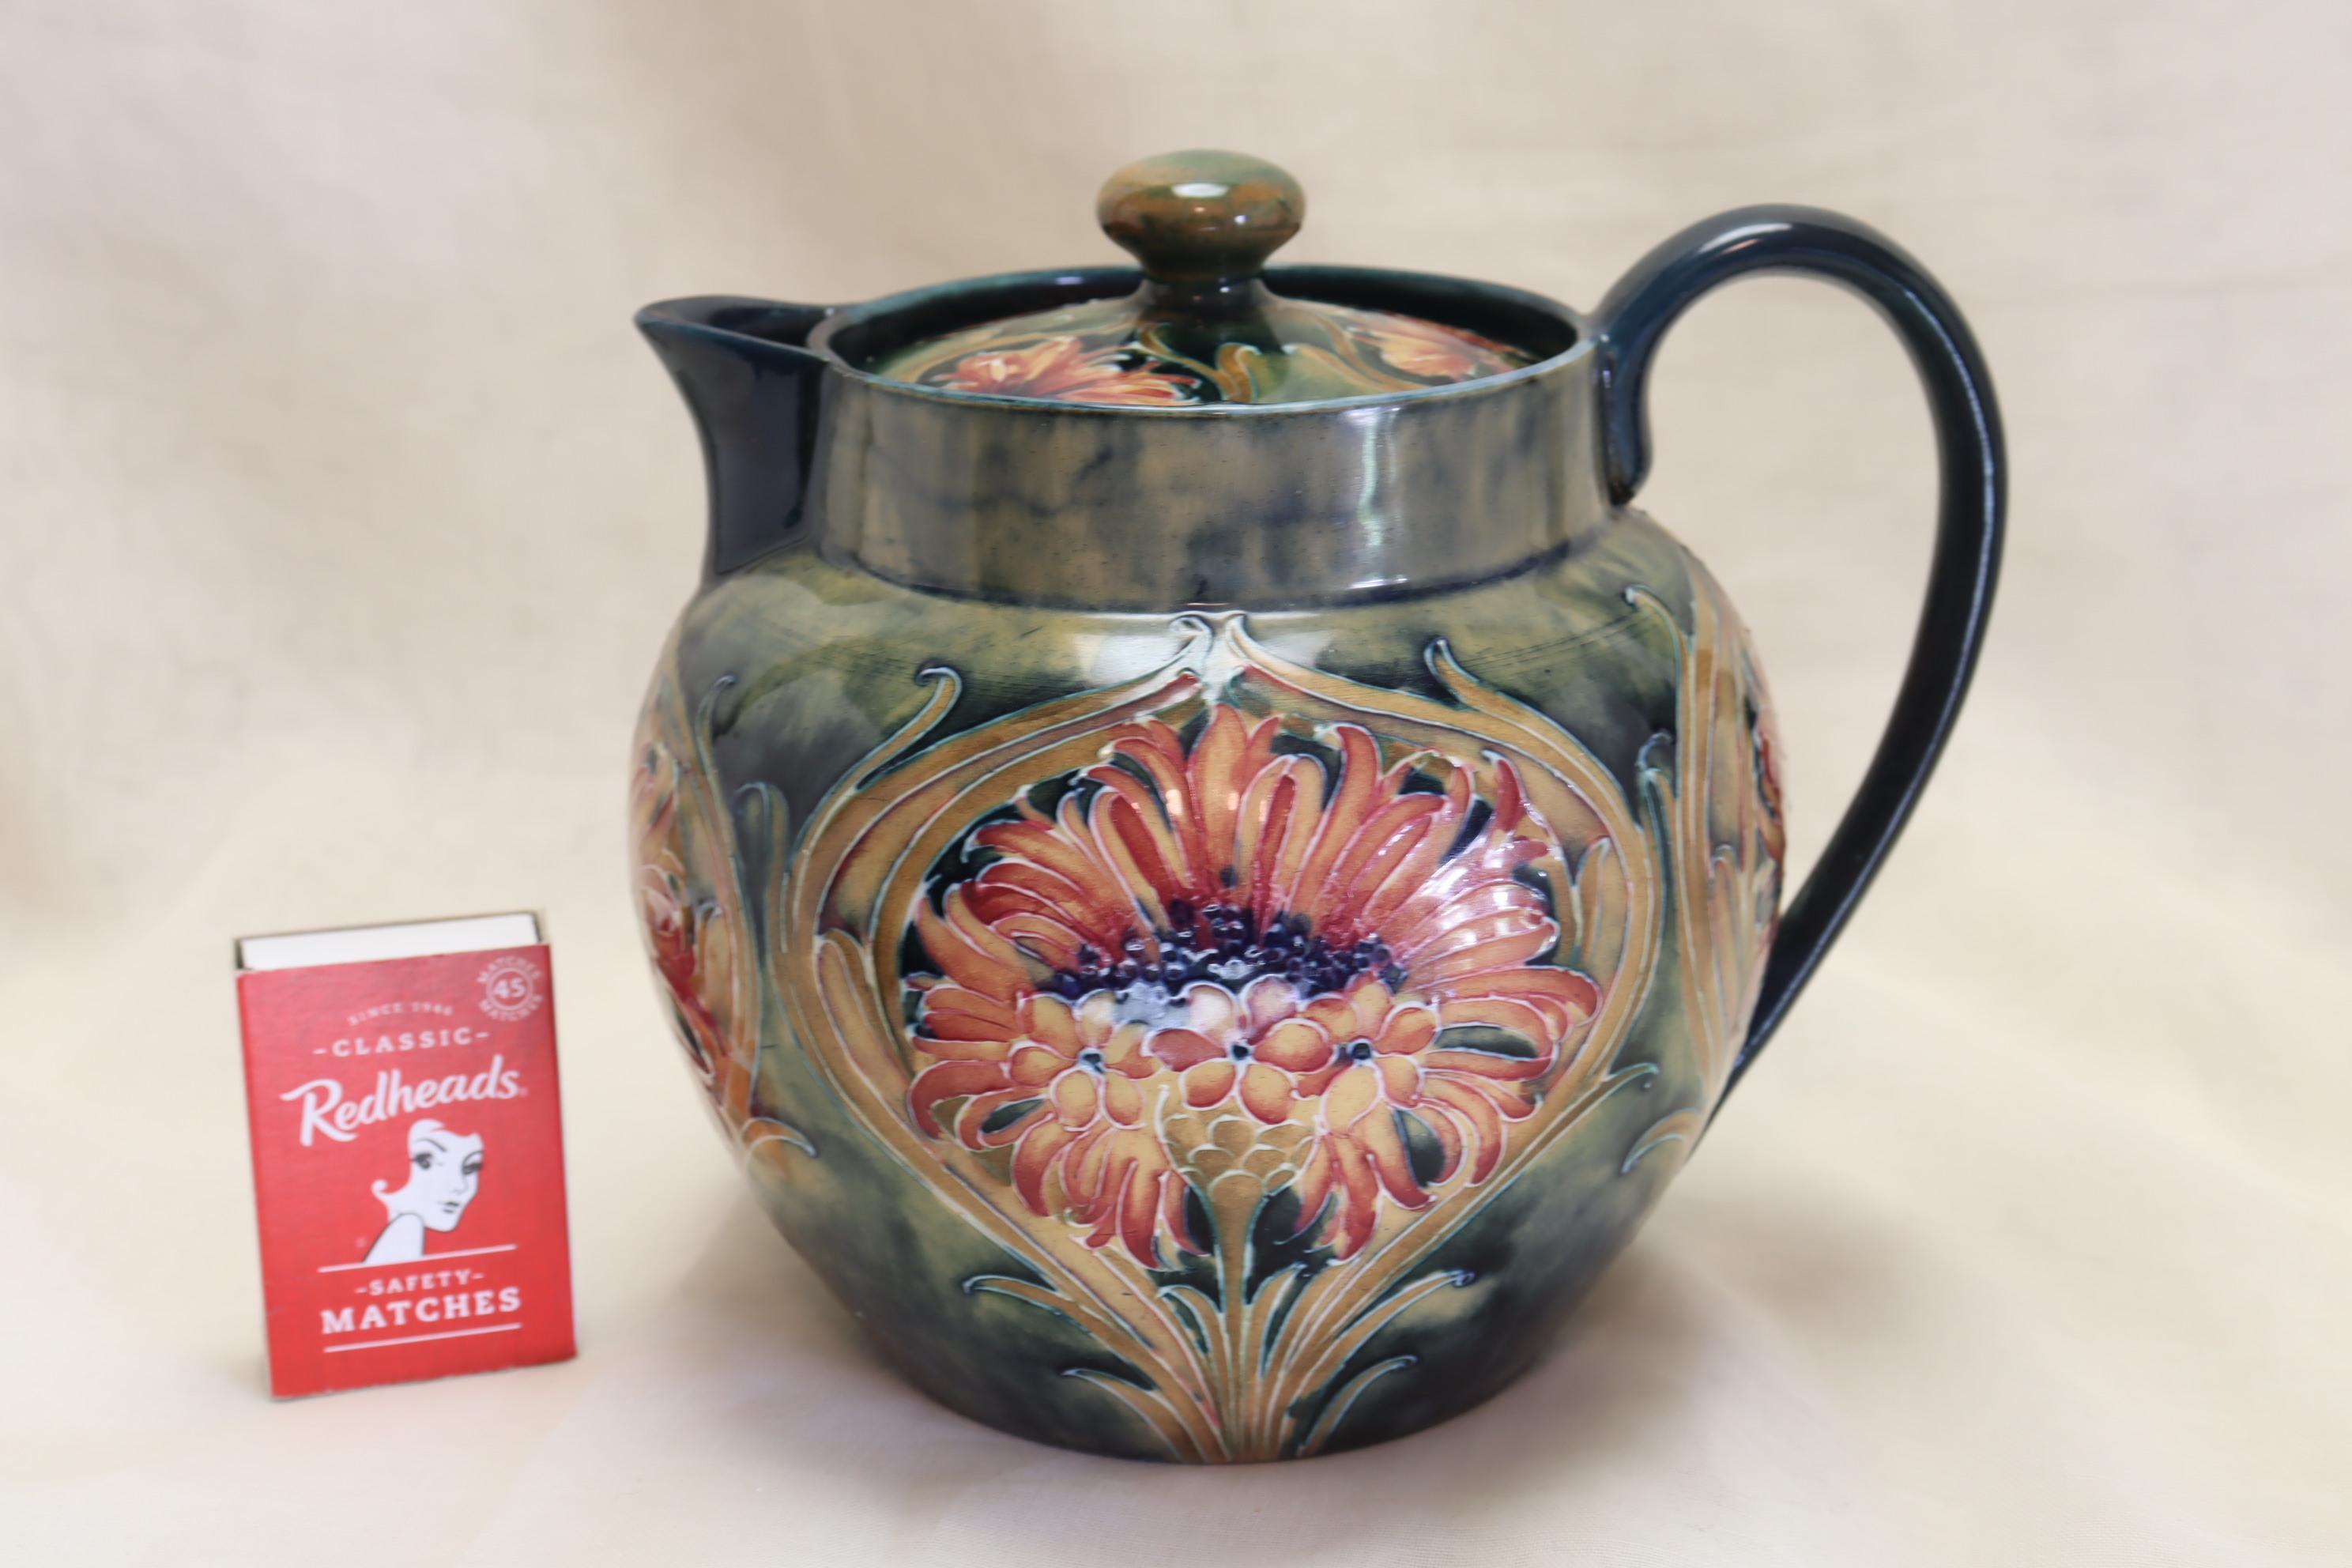 This Moorcroft teapot is decorated with the Revived Cornflower, or Brown Chrysanthemum design on a mottled green ground. This design was introduced in 1910-12 while William Moorcroft was still at McIntyre's, and it continued in use after he set up